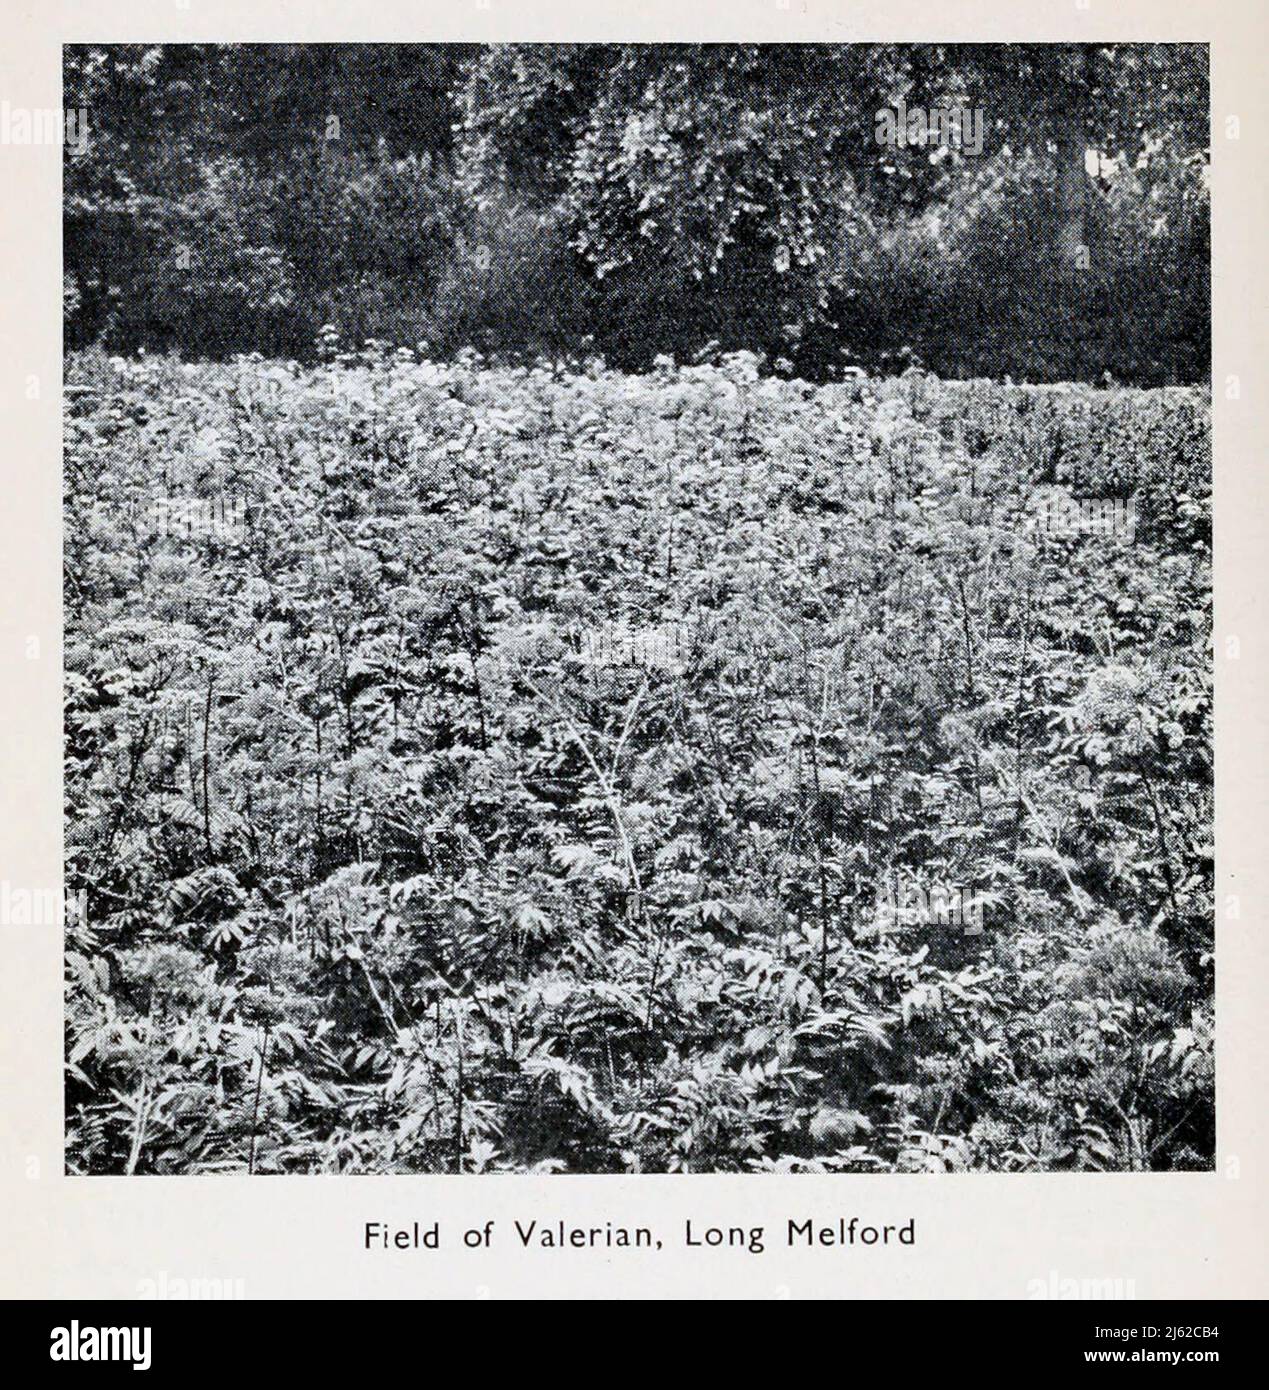 Field of Valerian, Long Melford from the book ' The romance of Empire drugs ' Published in London by the Scientific Department at Stafford Allen and Sons, Ltd Stock Photo